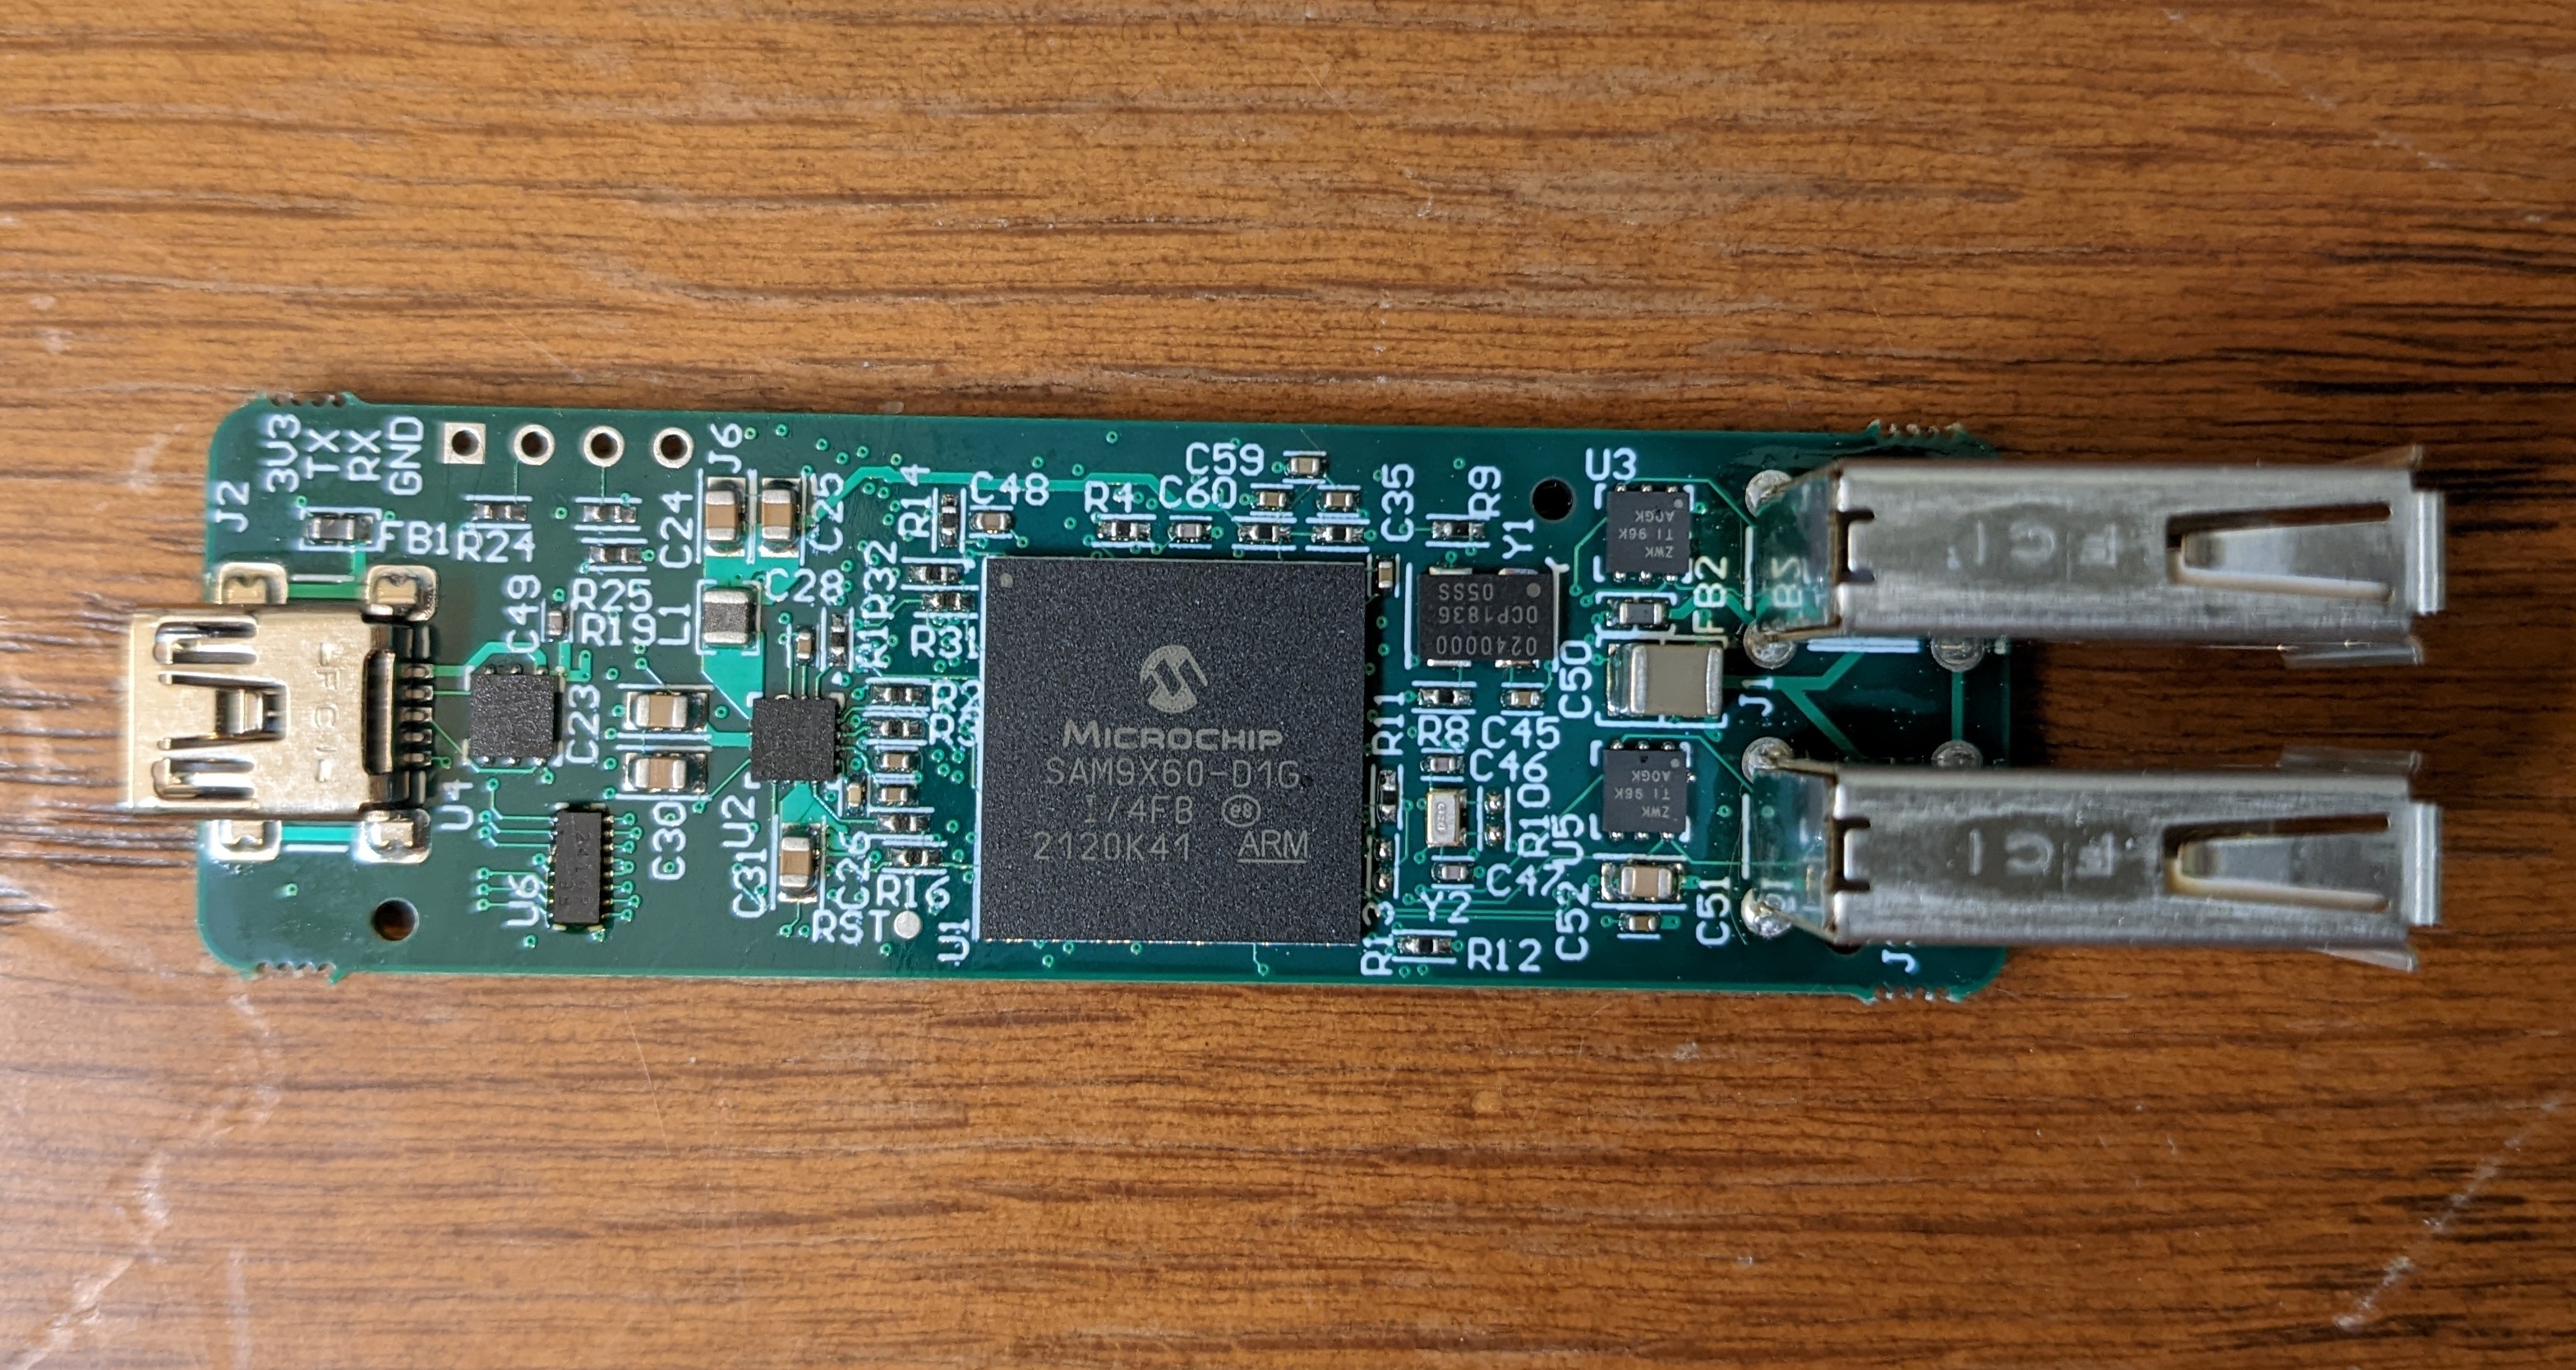 The board measures 67mm by 21mm, has a mini USB-B connector sticking out over one end and two vertical USB-A connectors on the other.